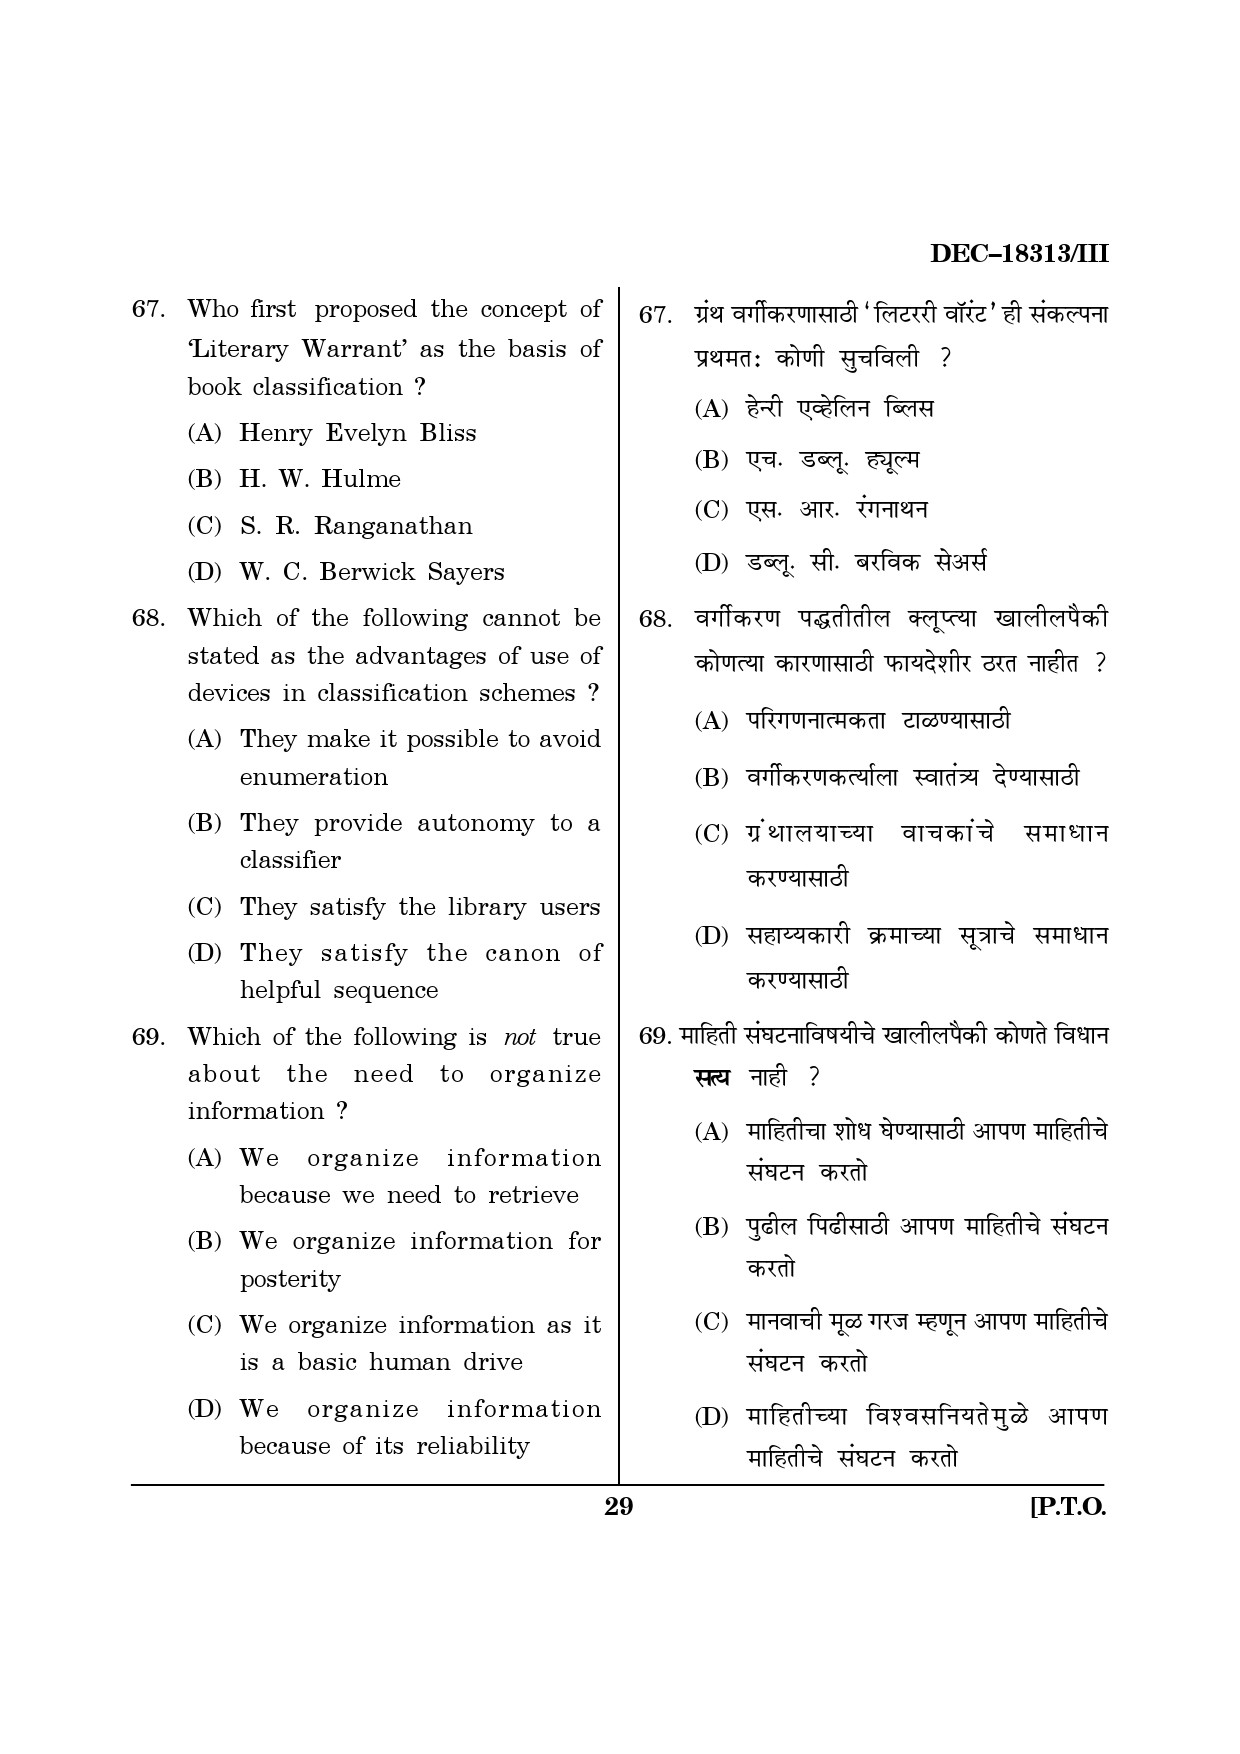 Maharashtra SET Library Information Science Question Paper III December 2013 28